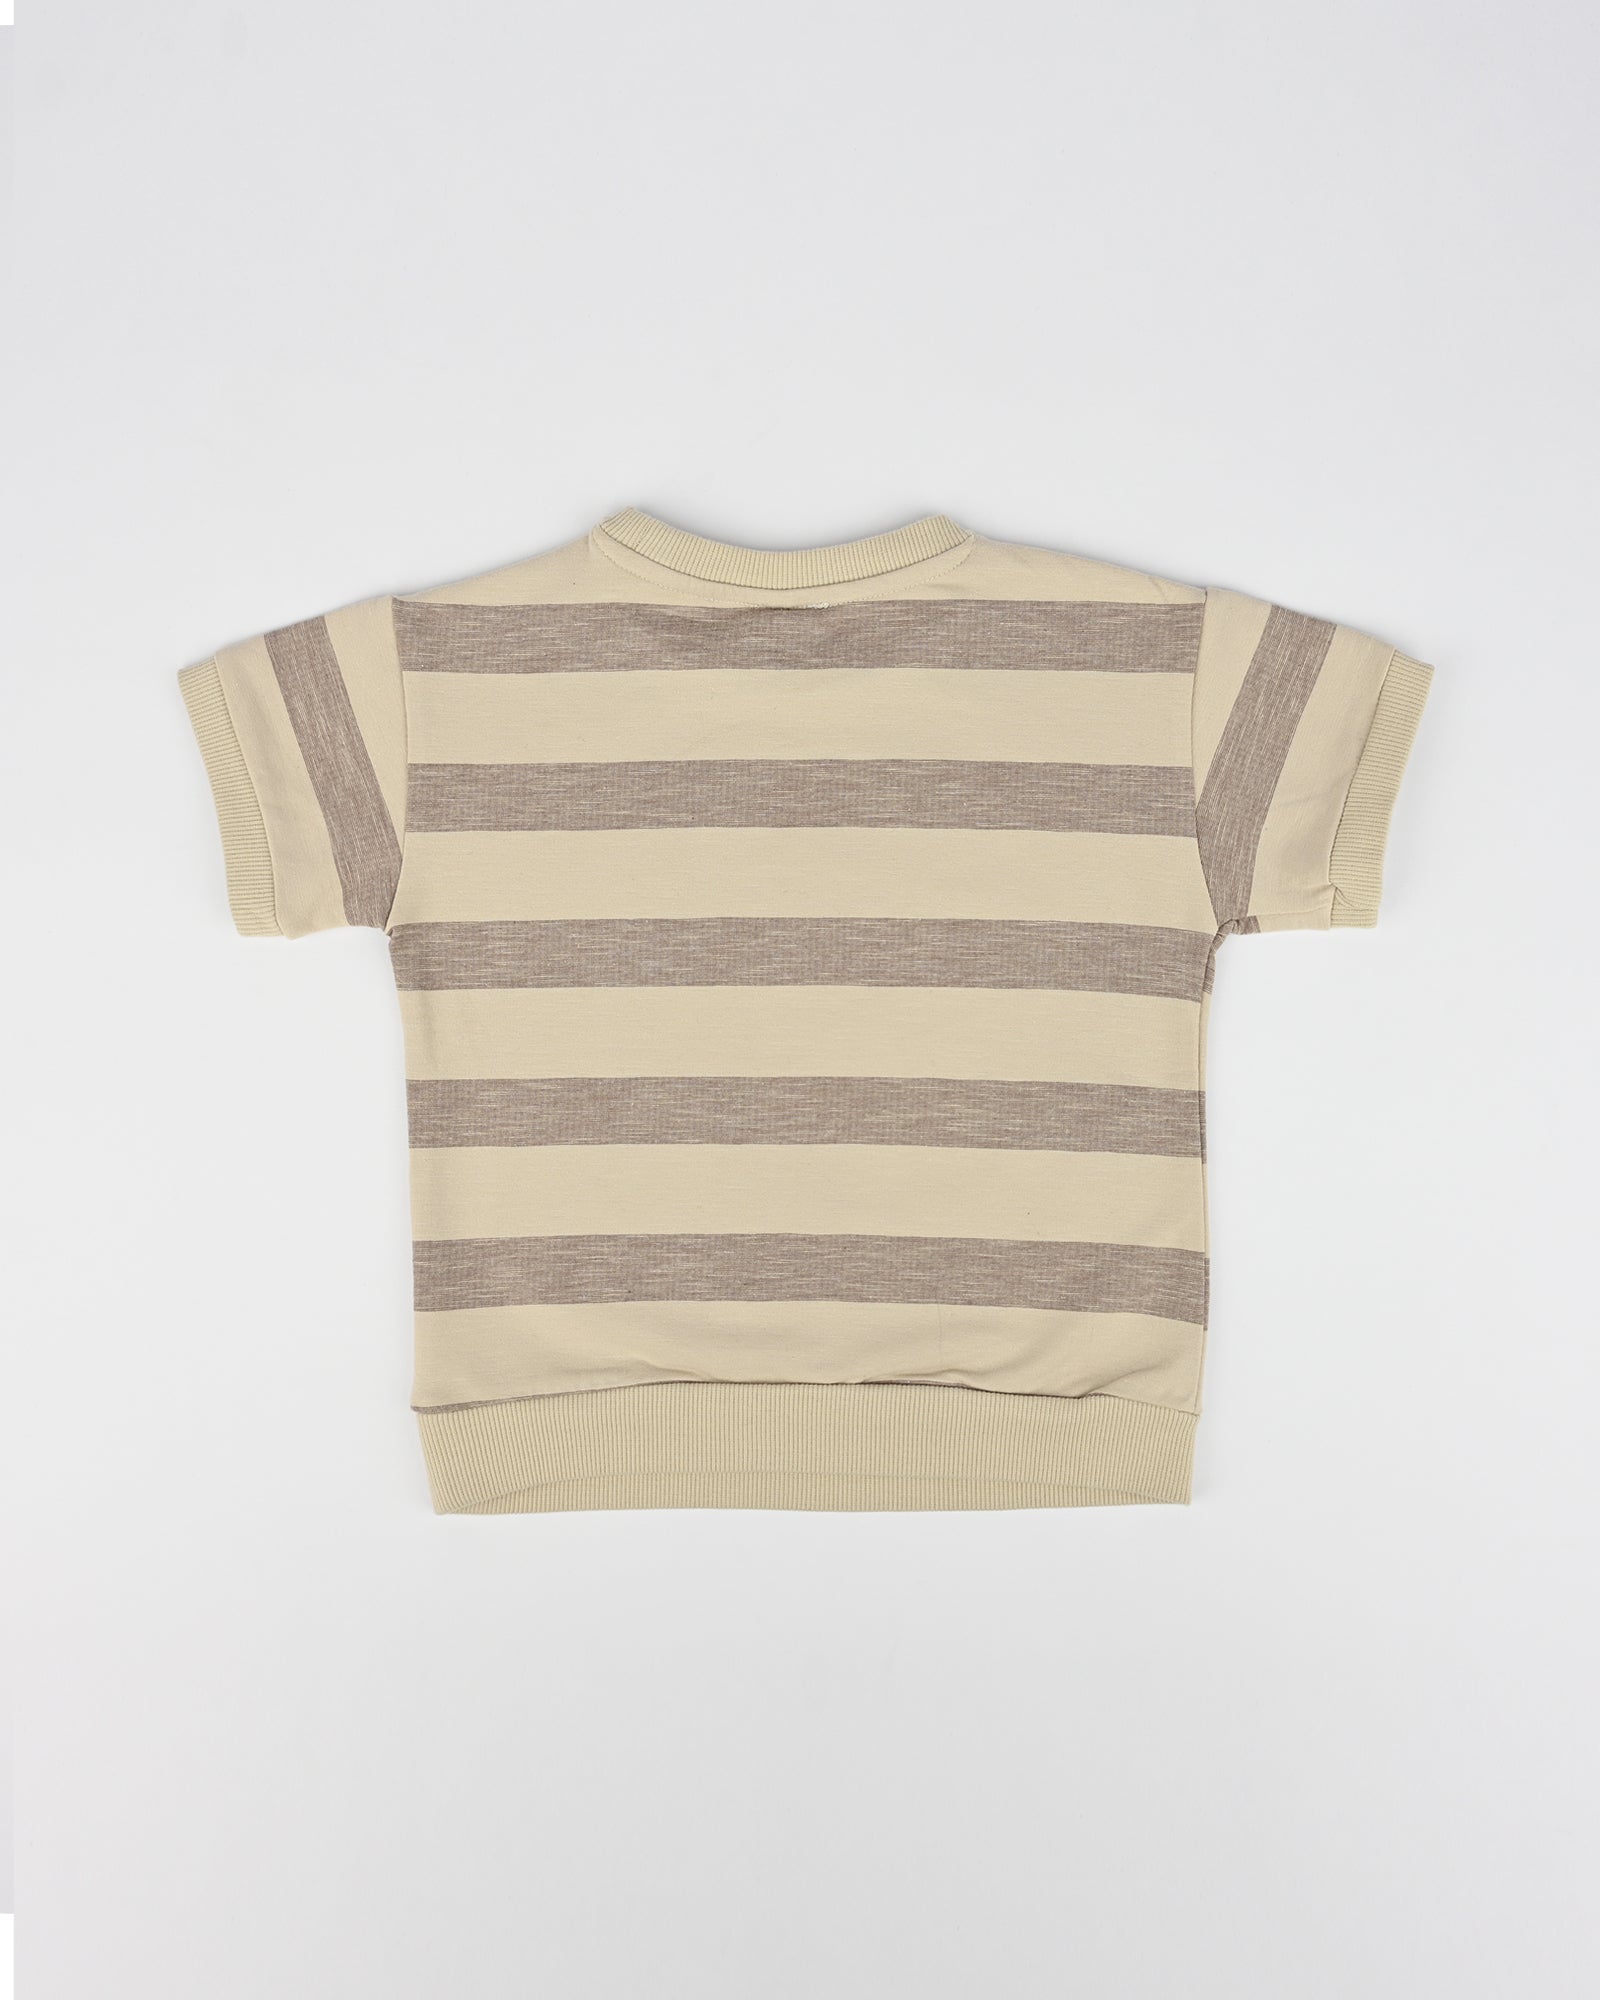 Boys Half Sleeve T-Shirt: Cool and Casual for Everyday Wear